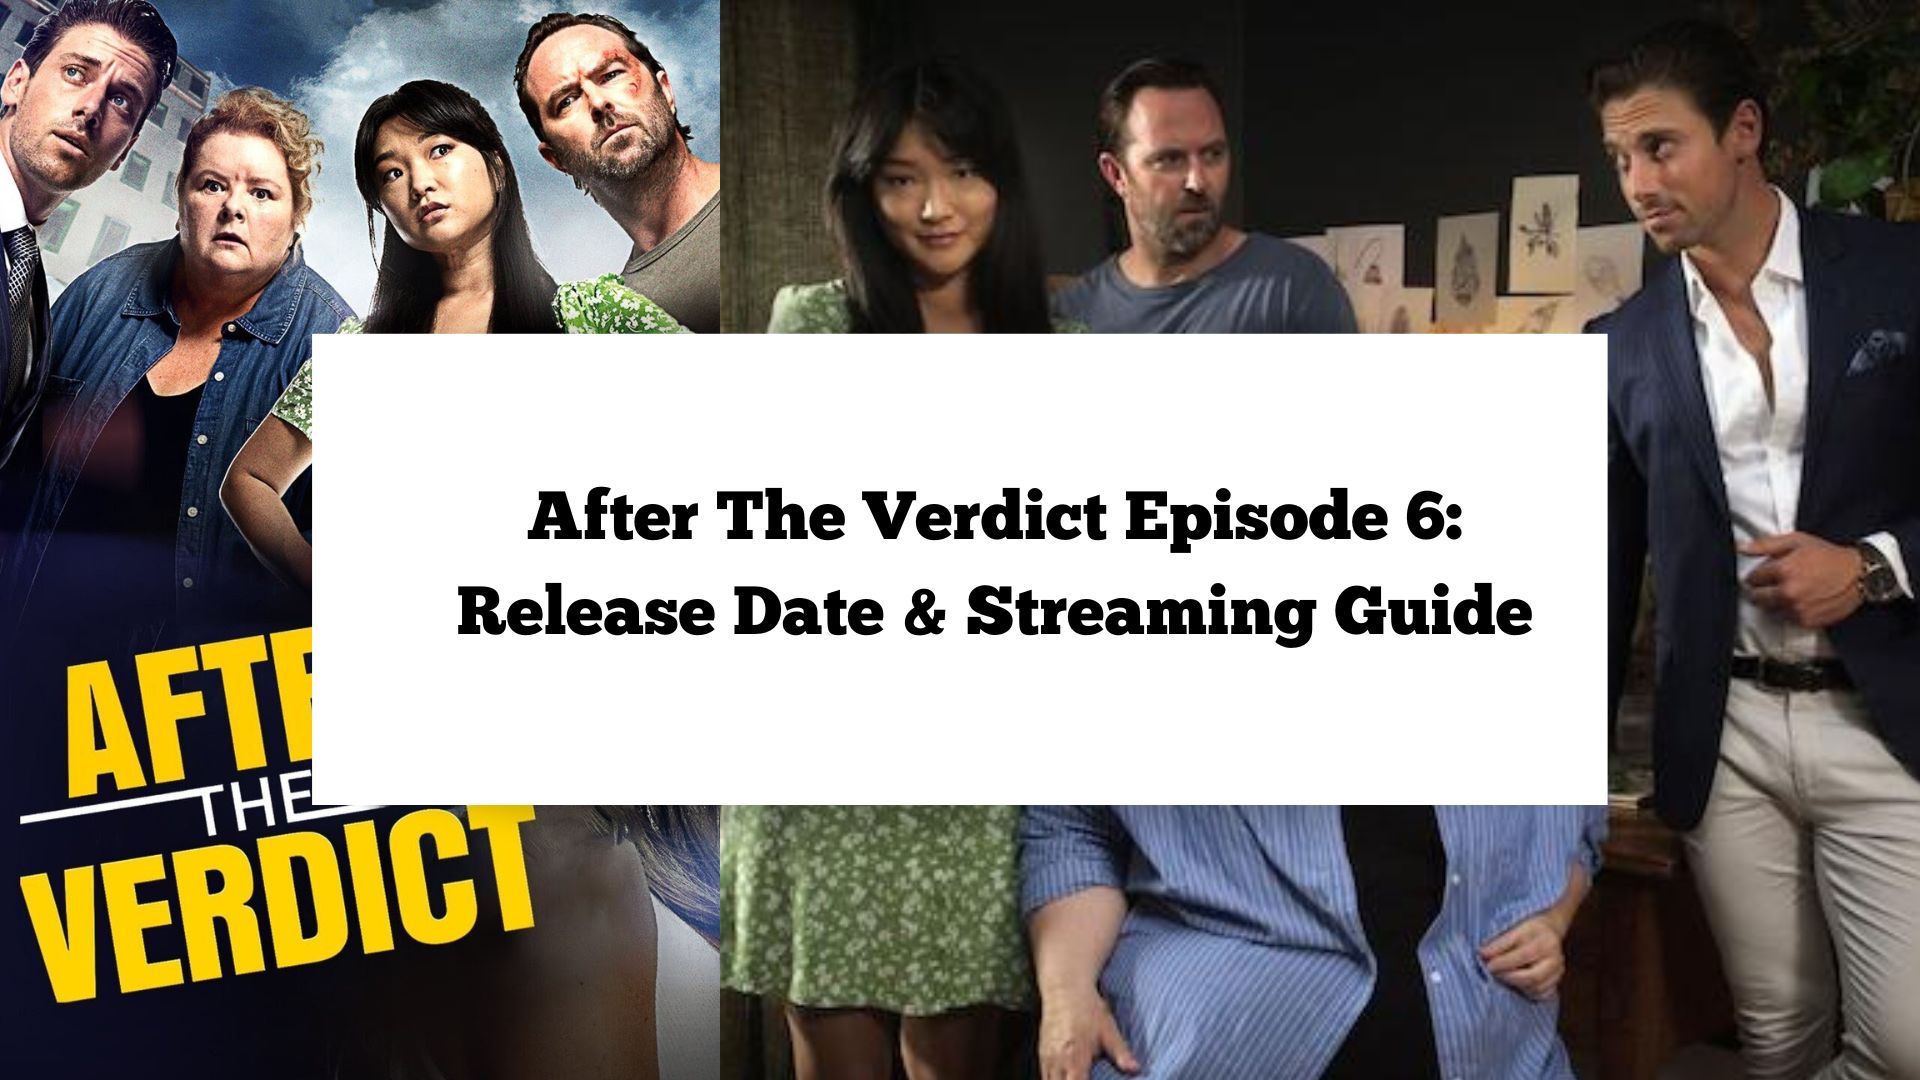 After The Verdict Episode 6: Release Date & Streaming Guide